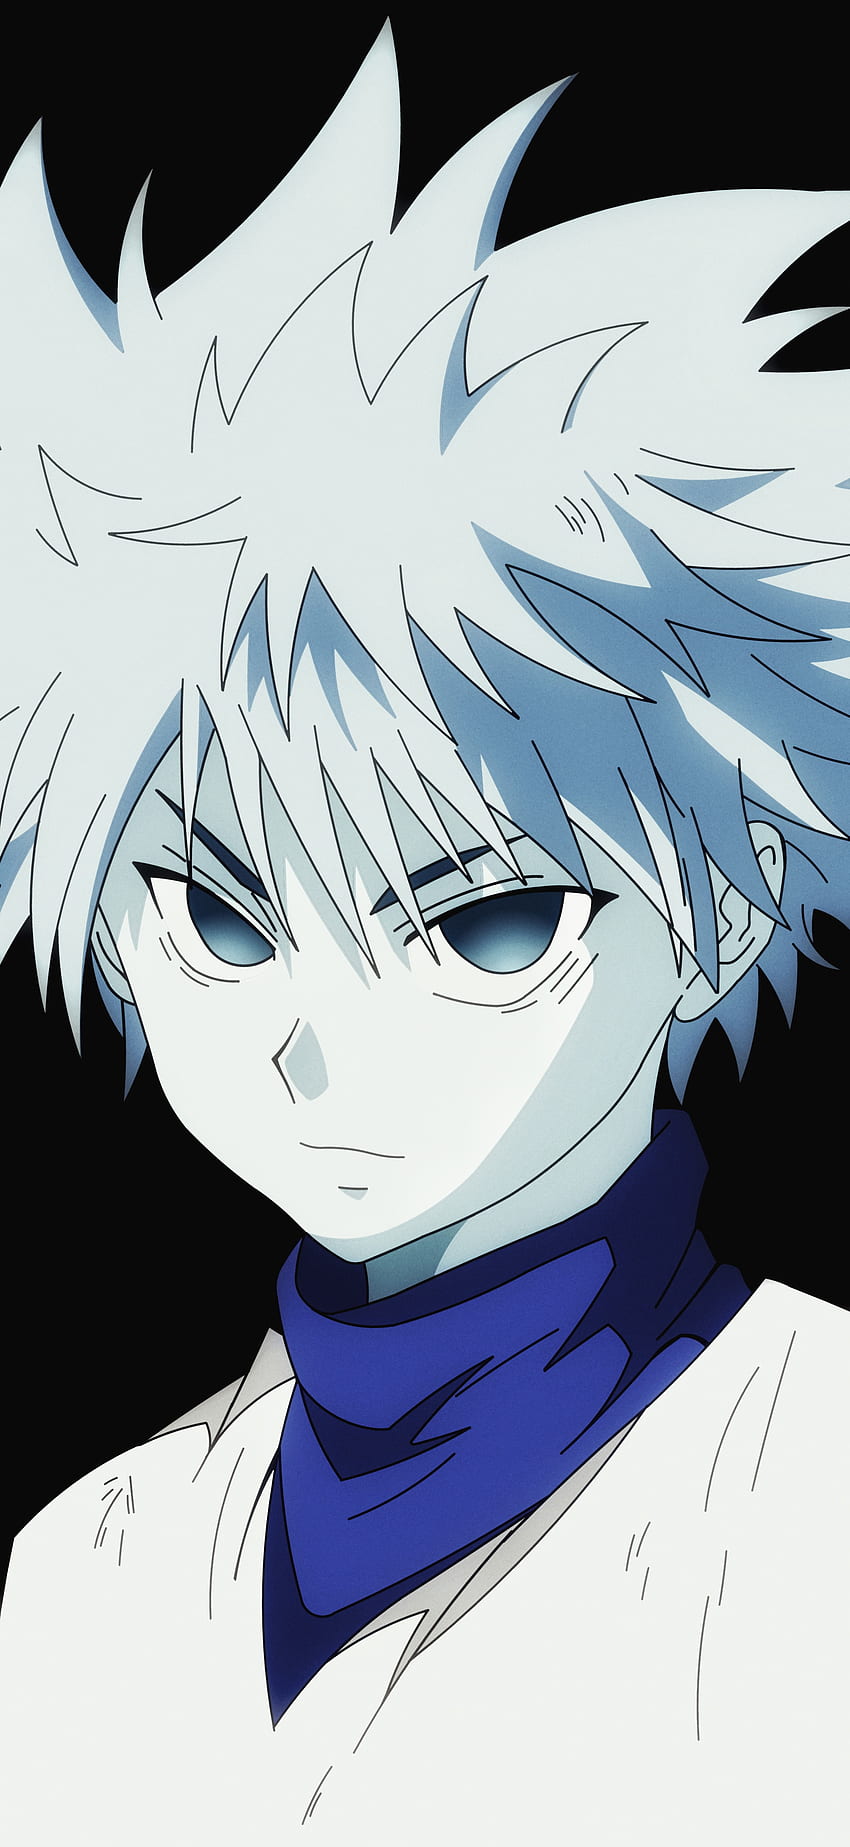 HxH Detours: The Hunter's Exam & Zoldyck Family Character Introduction, by  Rupa Jogani, AniGay